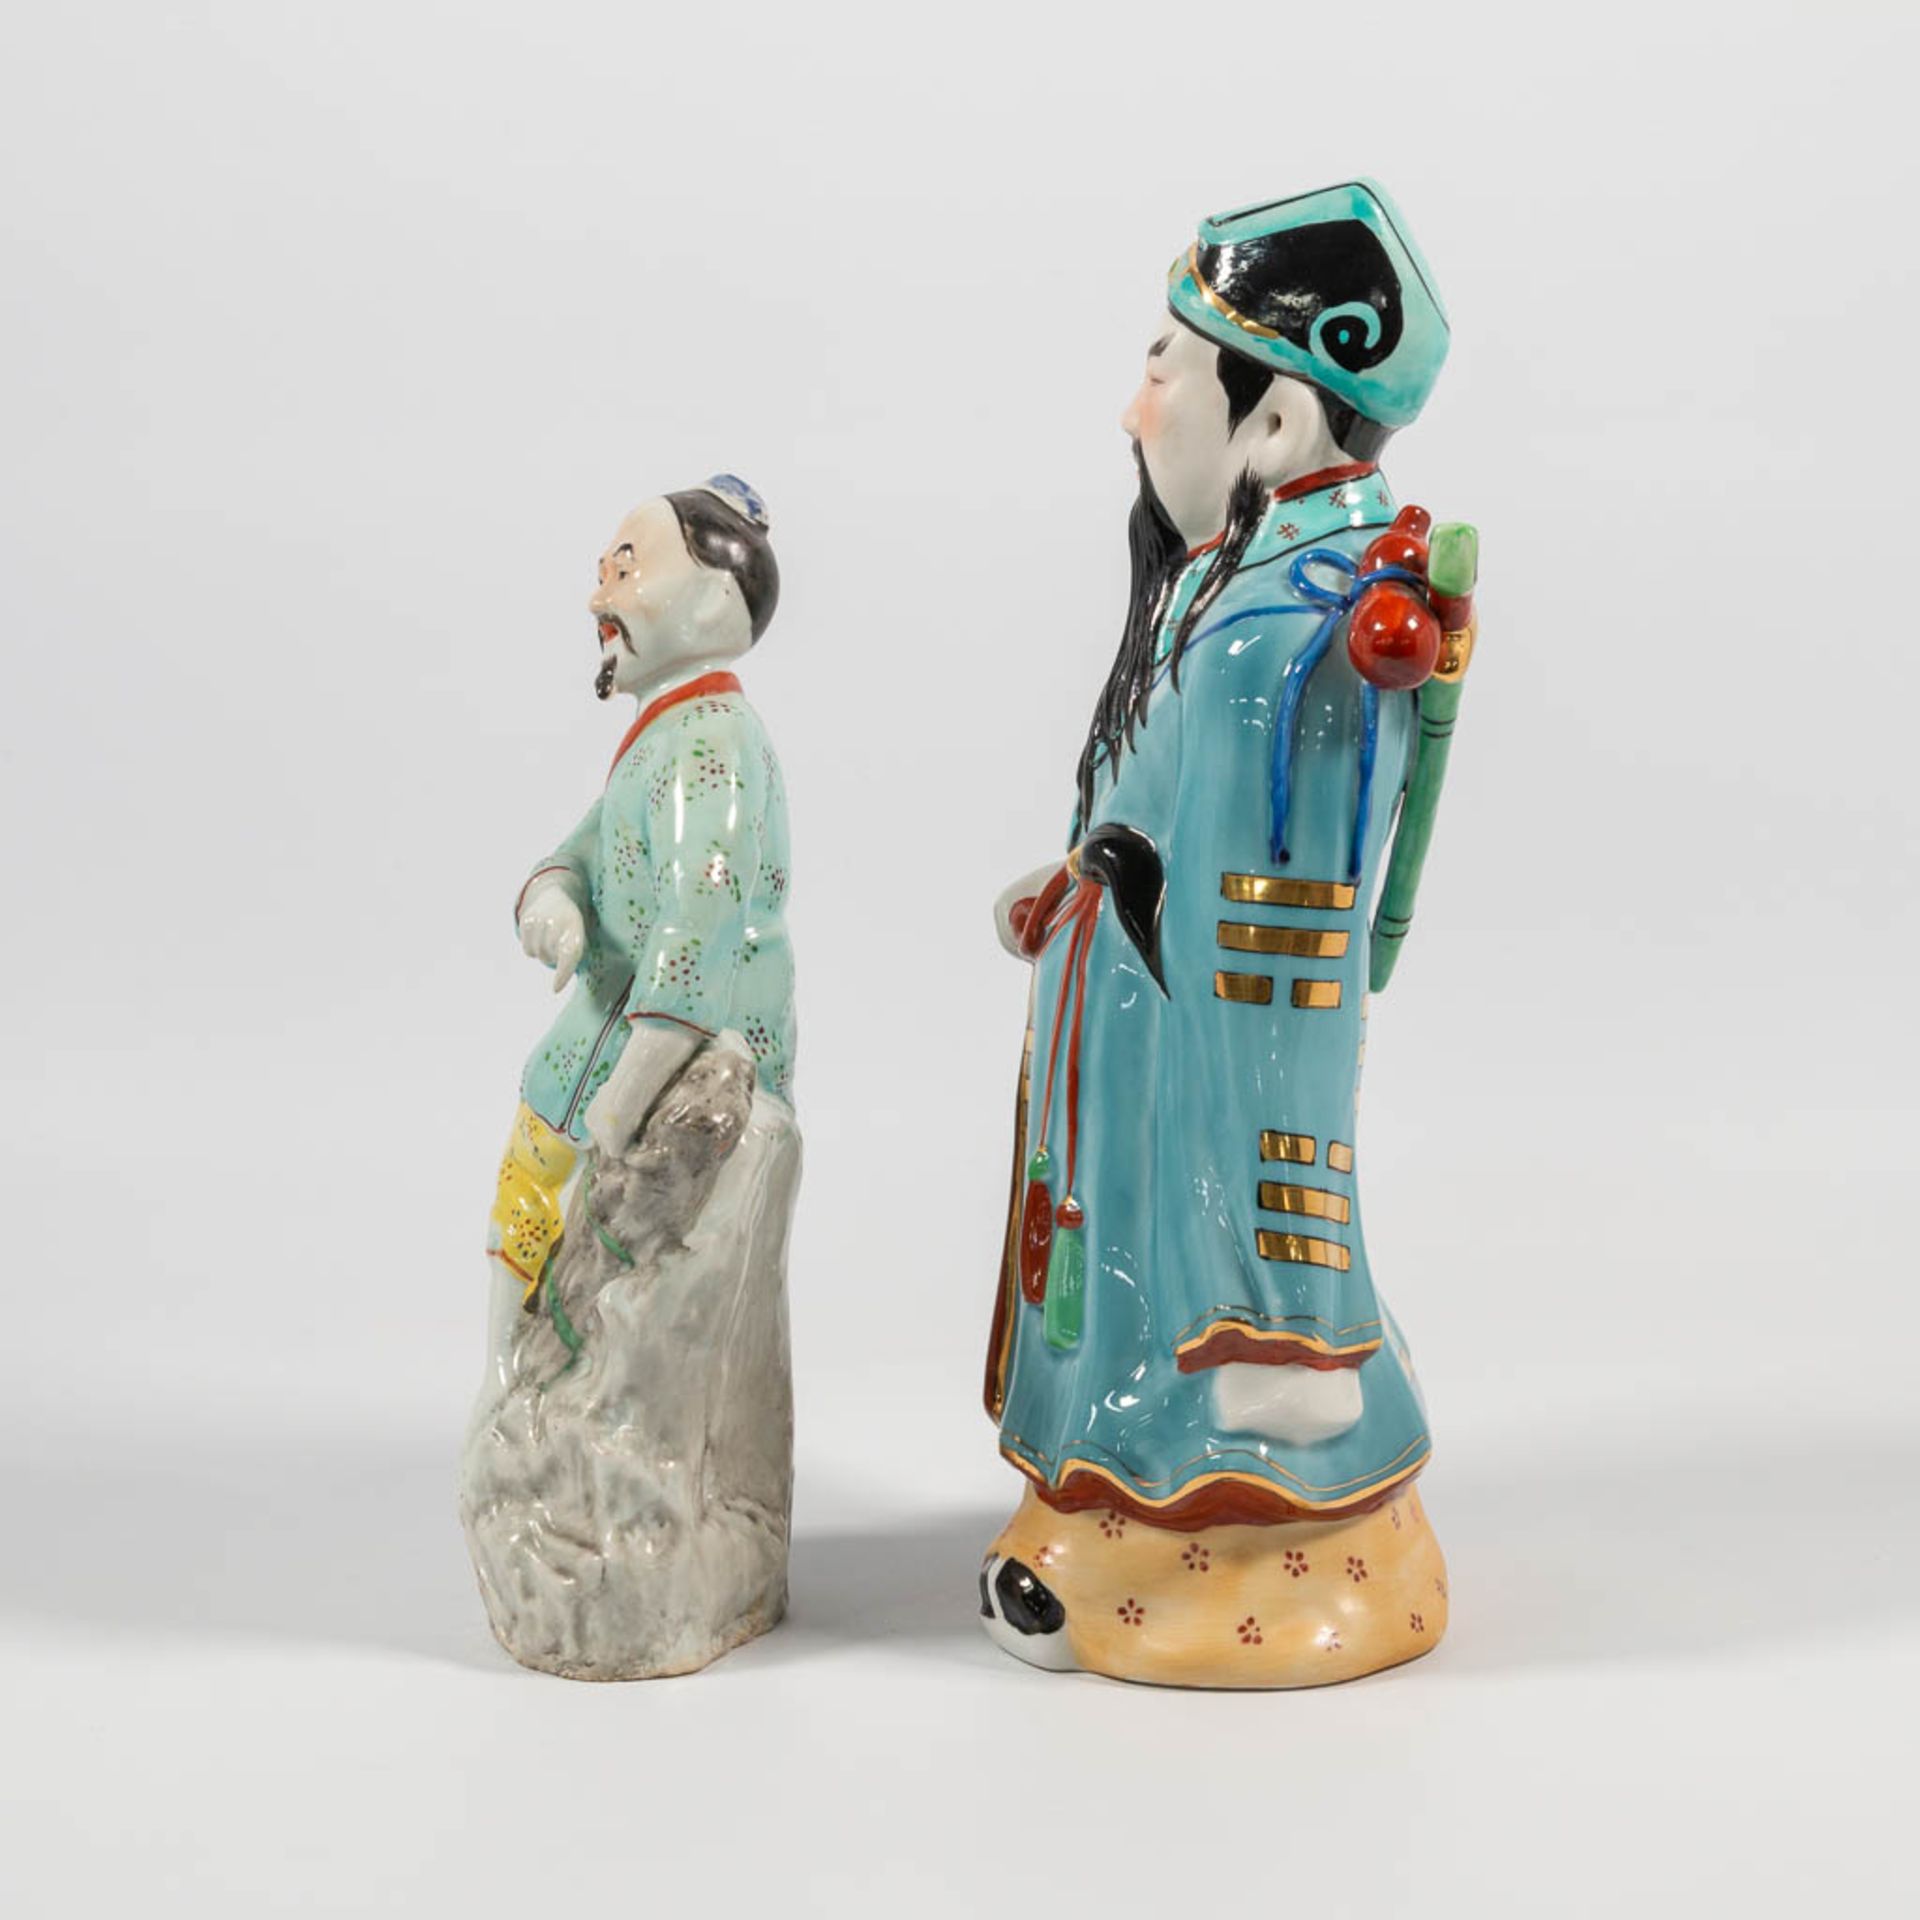 A Collection of 4 Chinese immortal figurines, made of porcelain. - Image 23 of 25